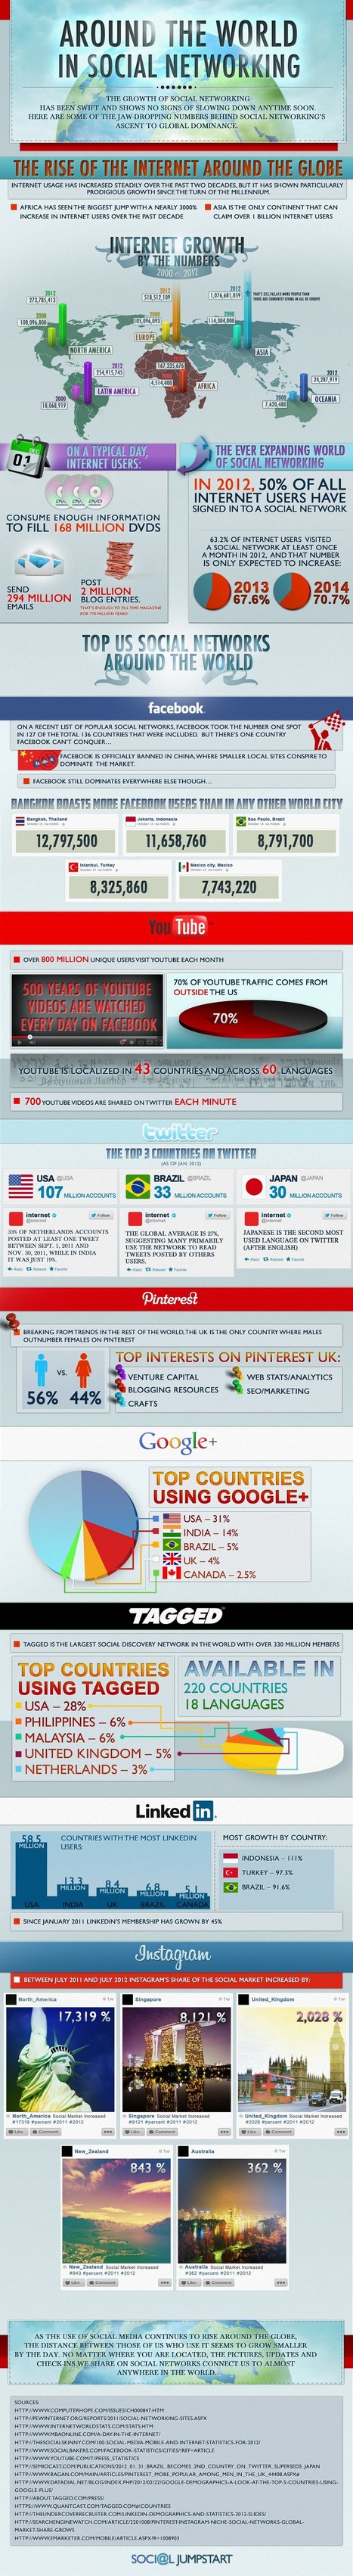 Social Media Around the World: A Complete Infographic Guide | Networked Nonprofits and Social Media | Scoop.it